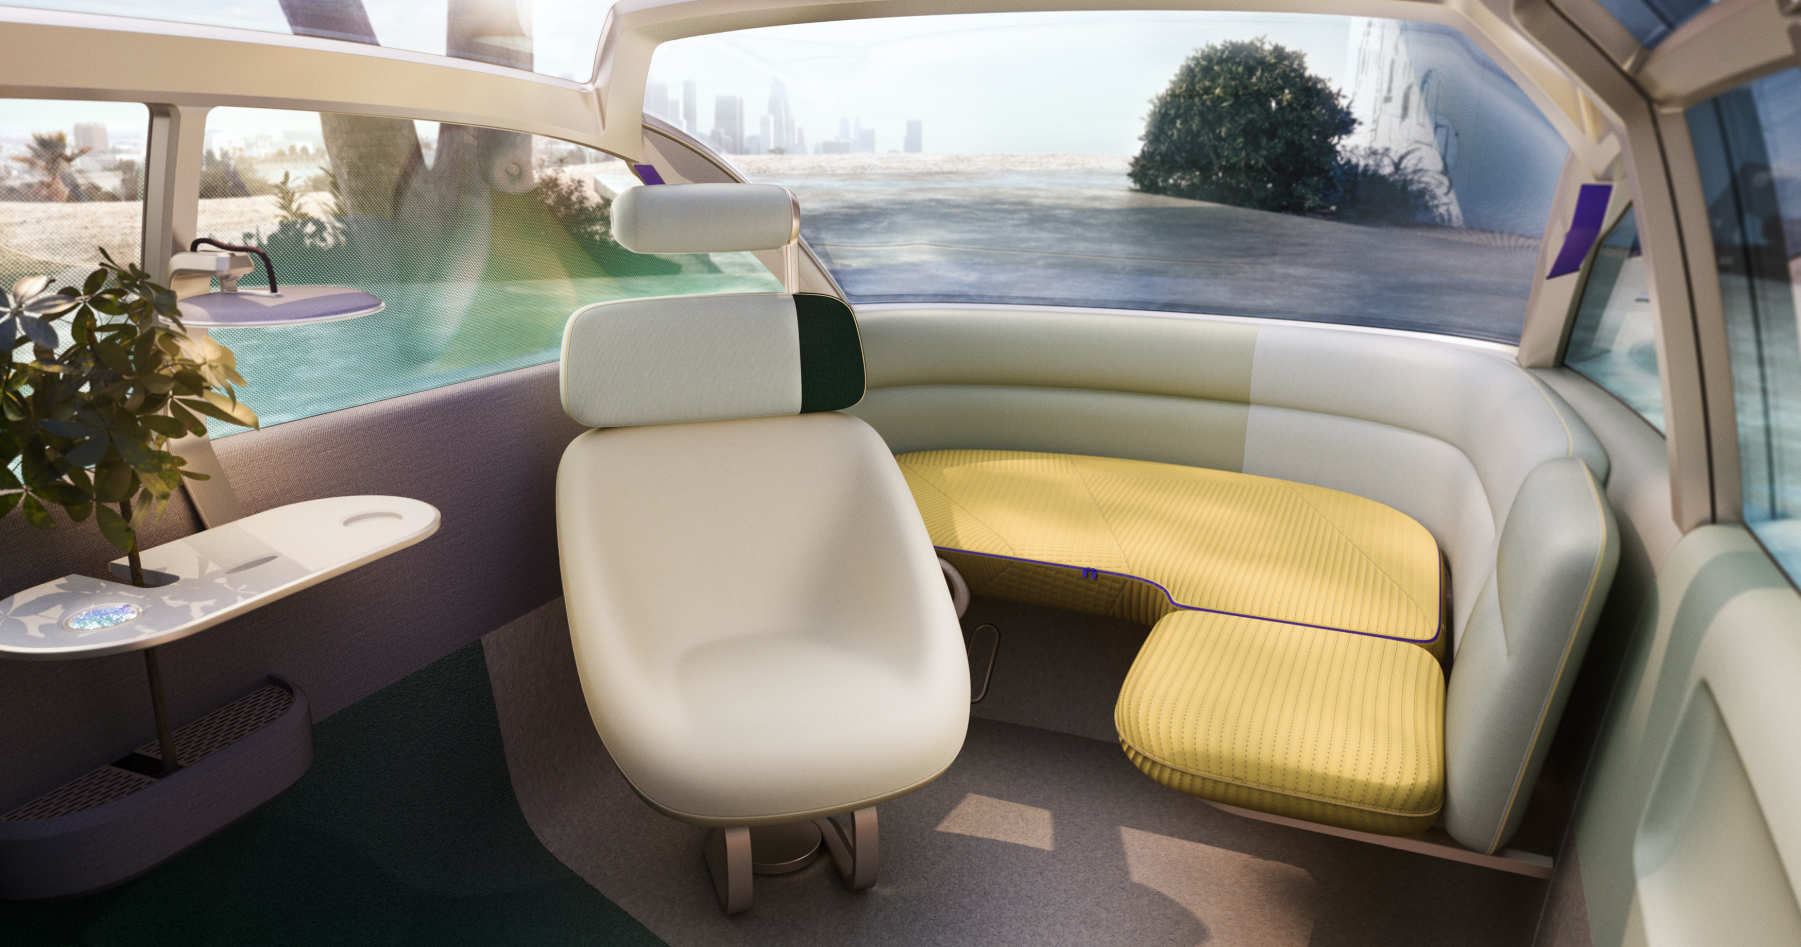 Mini’s Urbanaut Concept Is A Room On Wheels That We’ve Seen Before And We’ll See Again